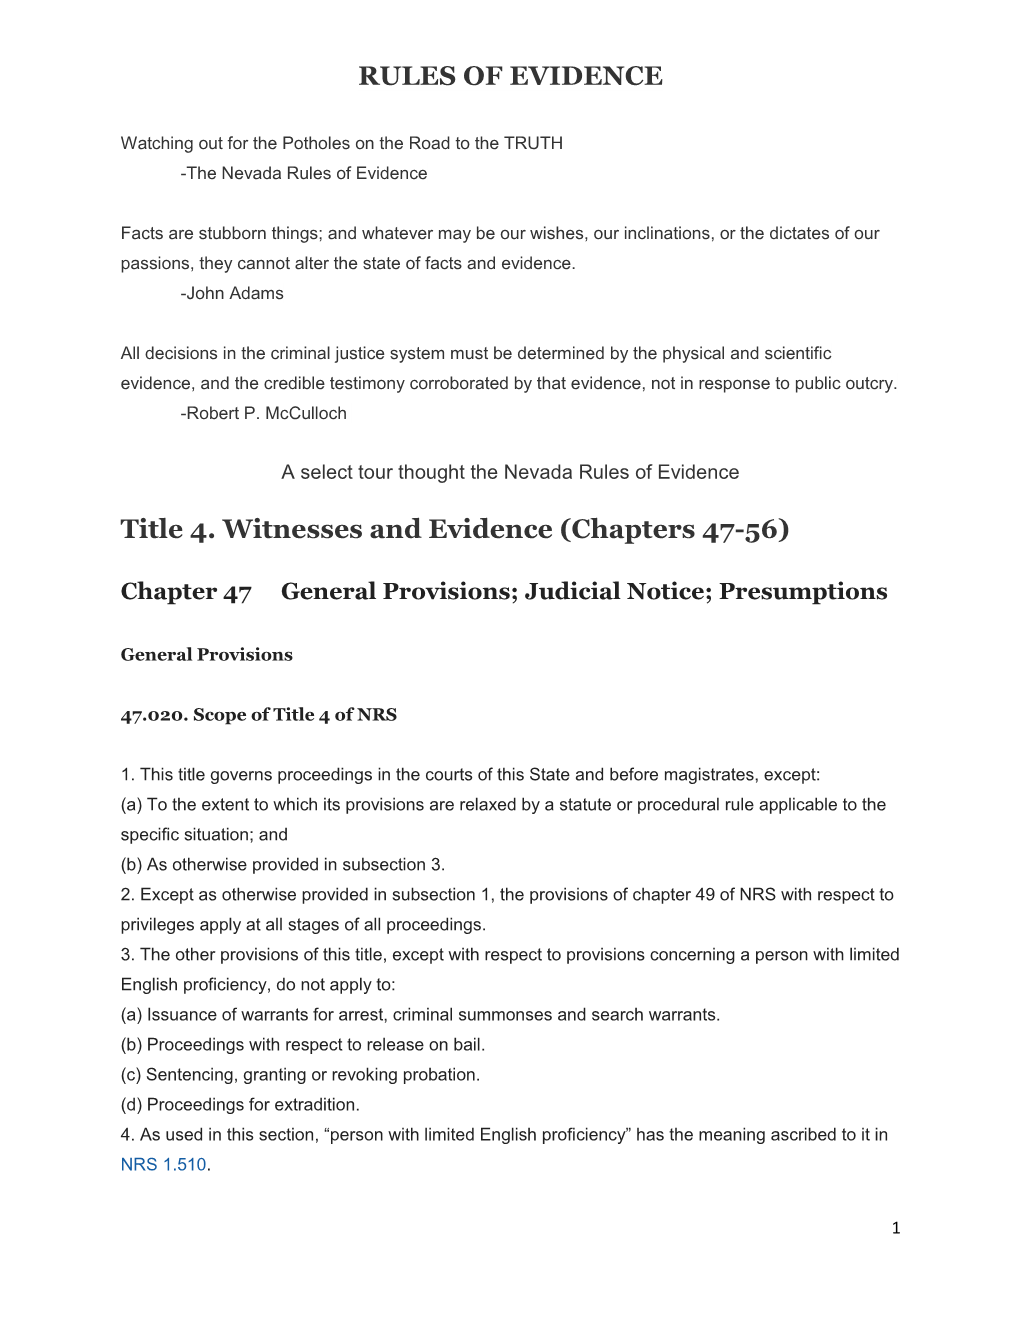 RULES of EVIDENCE Title 4. Witnesses and Evidence (Chapters 47-56)